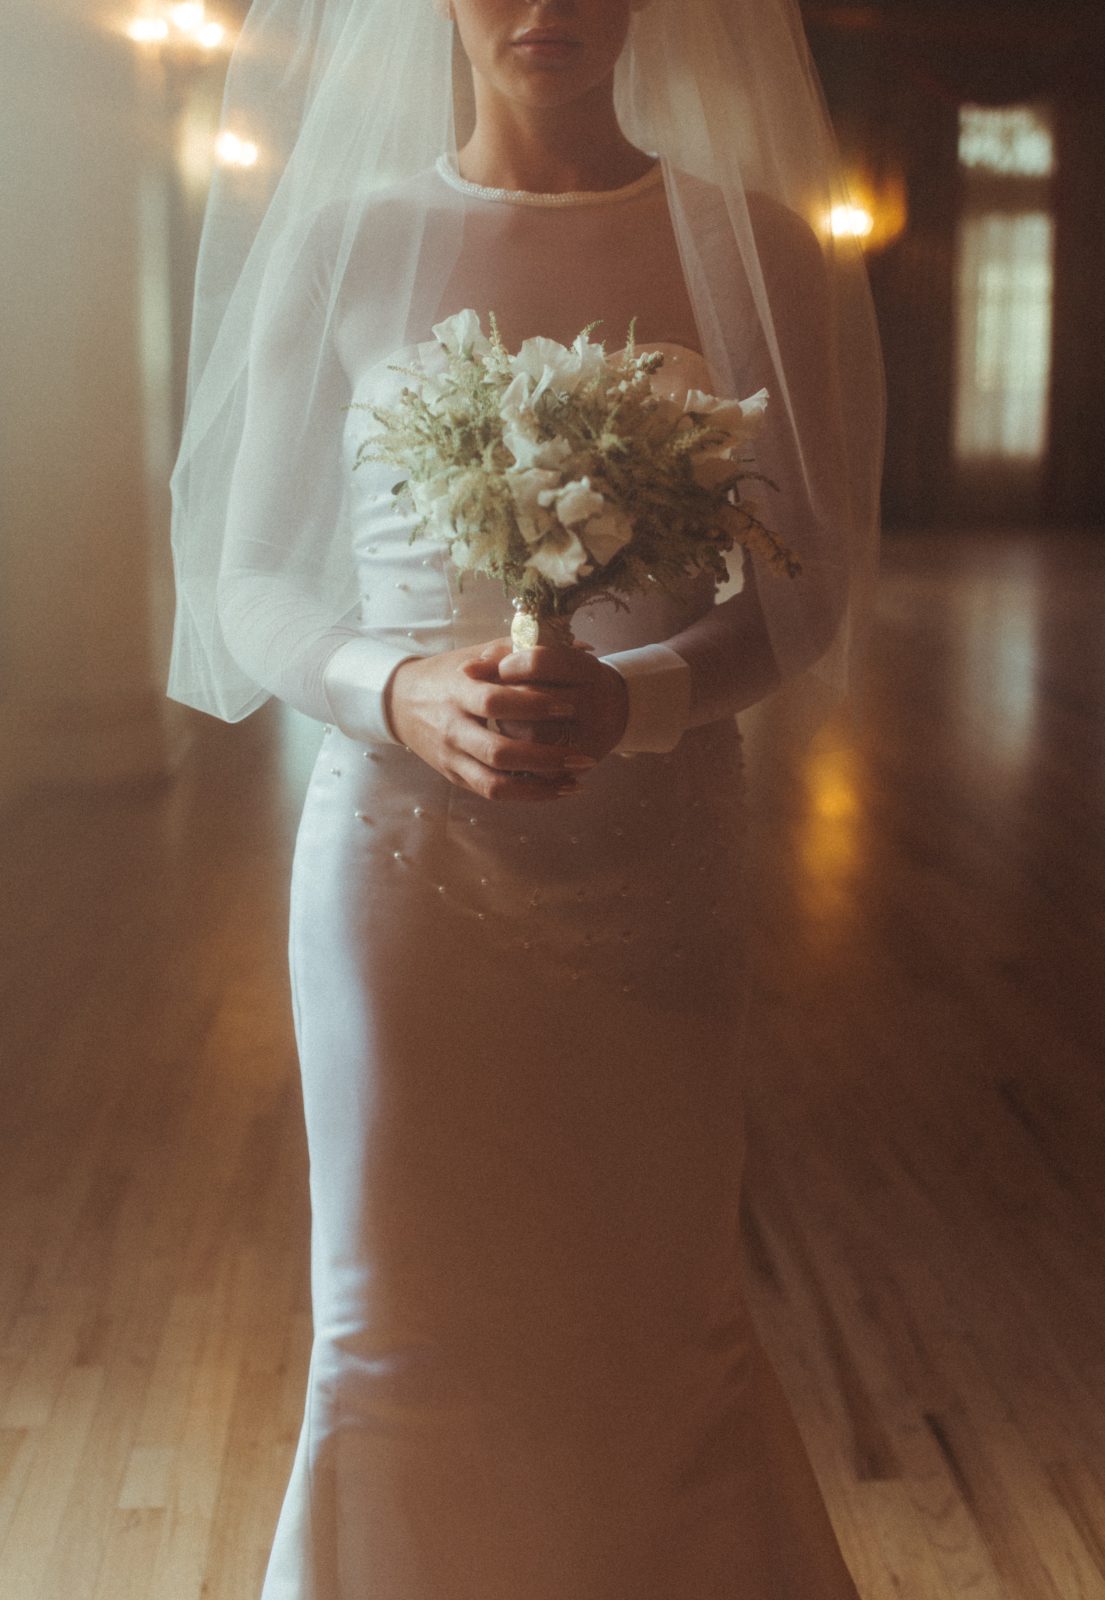 A close up shot of a Calyx bride's beautiful gown as she holds up her white posy bouquet